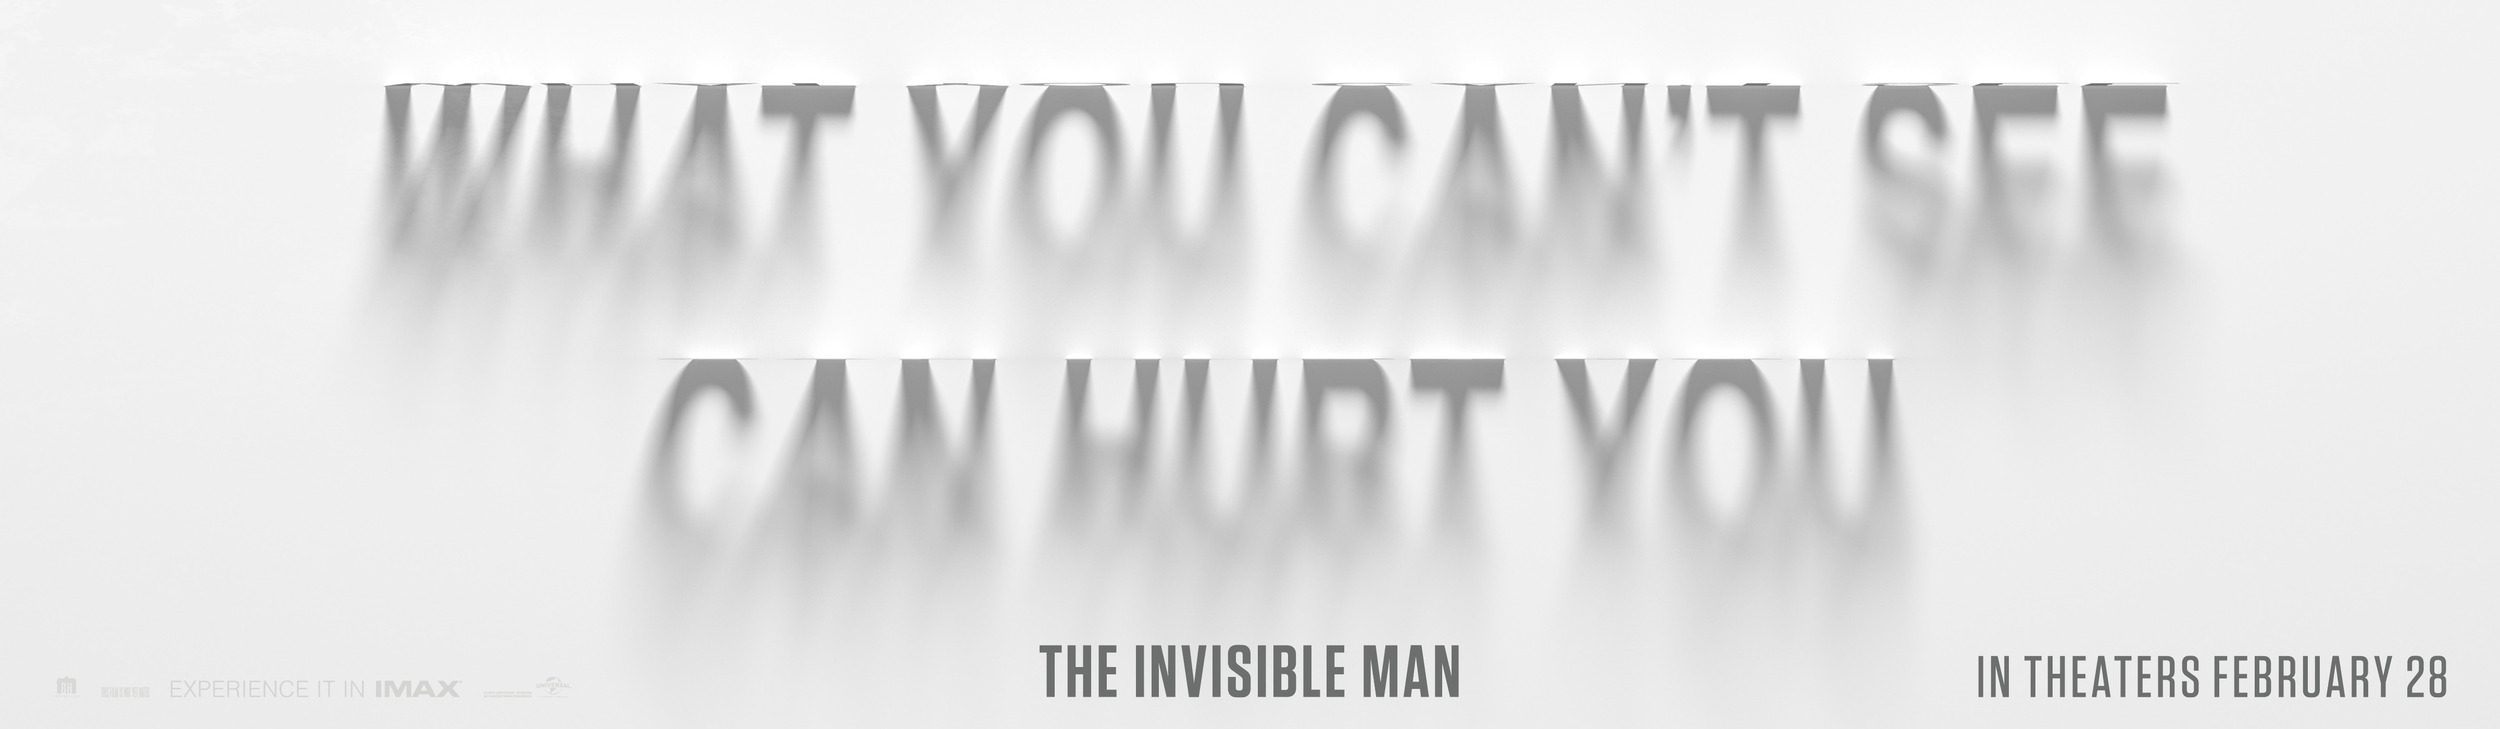 Mega Sized Movie Poster Image for The Invisible Man (#5 of 13)